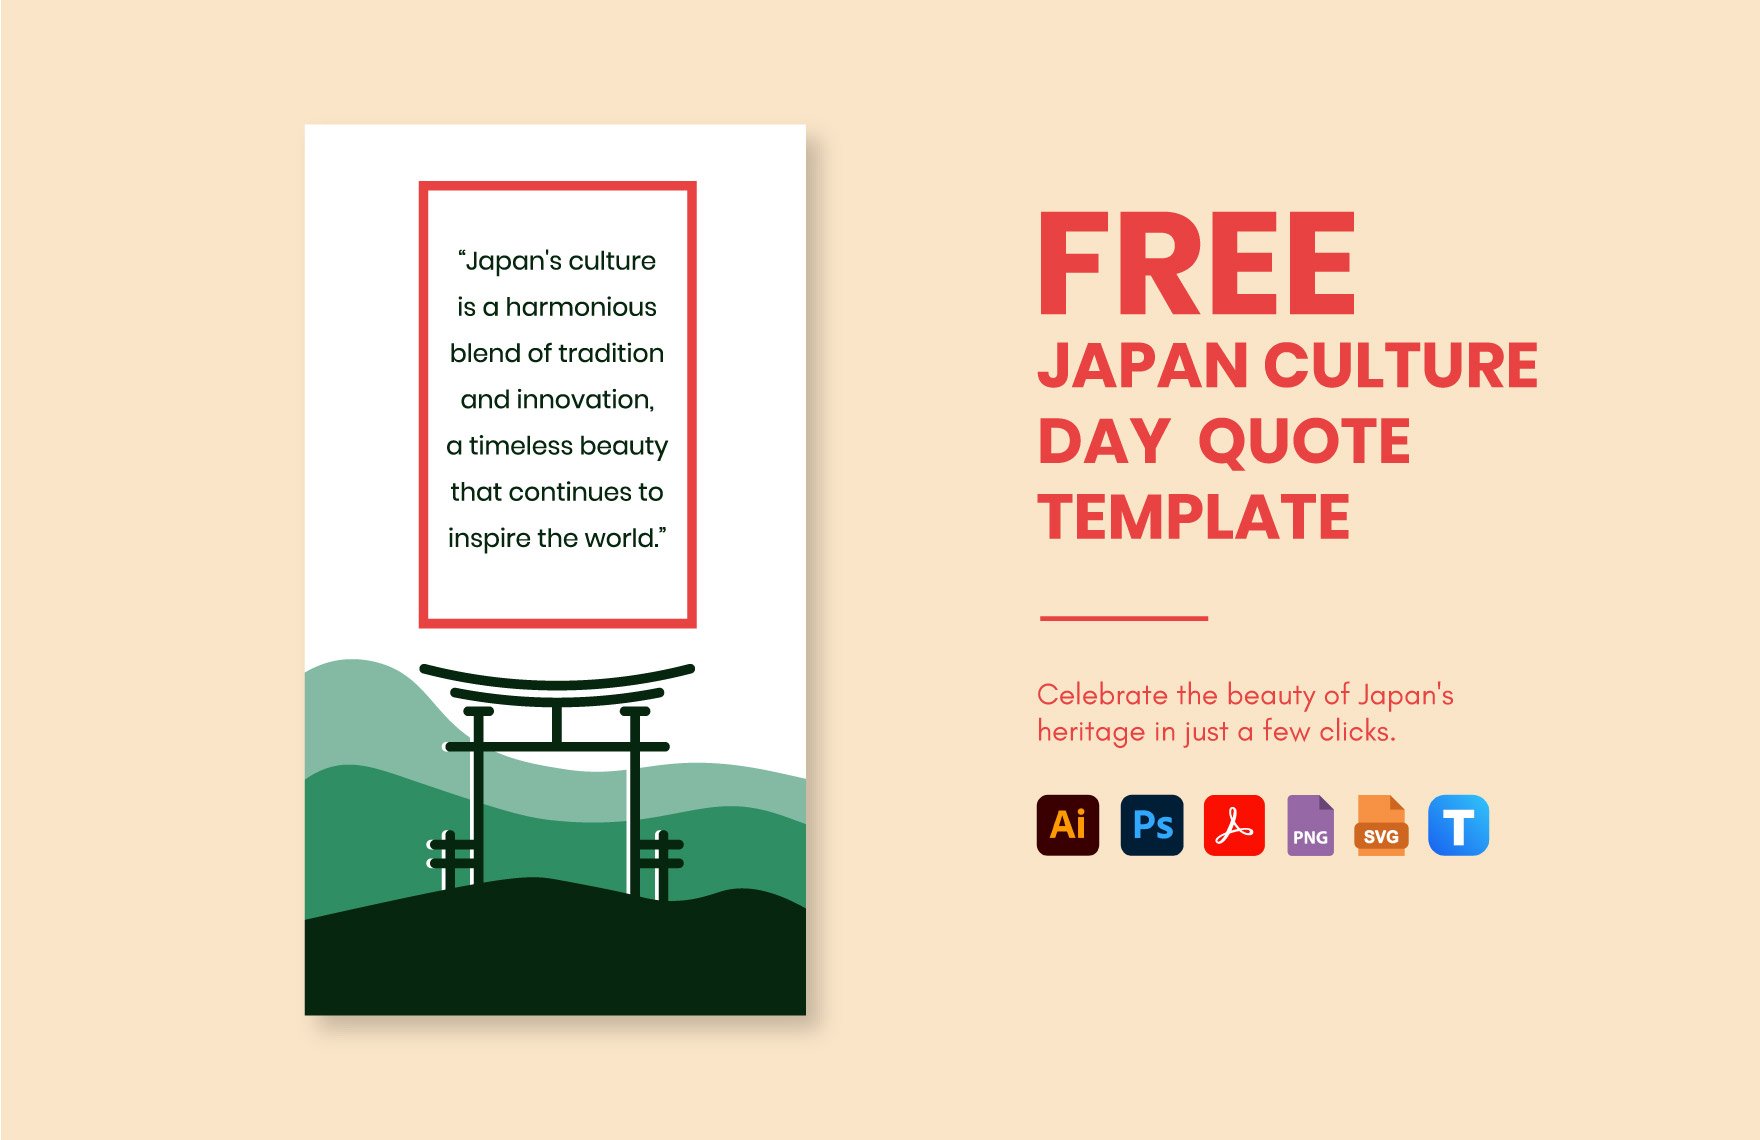 Free Japan Culture Day Quote  in PDF, Illustrator, PSD, SVG, PNG